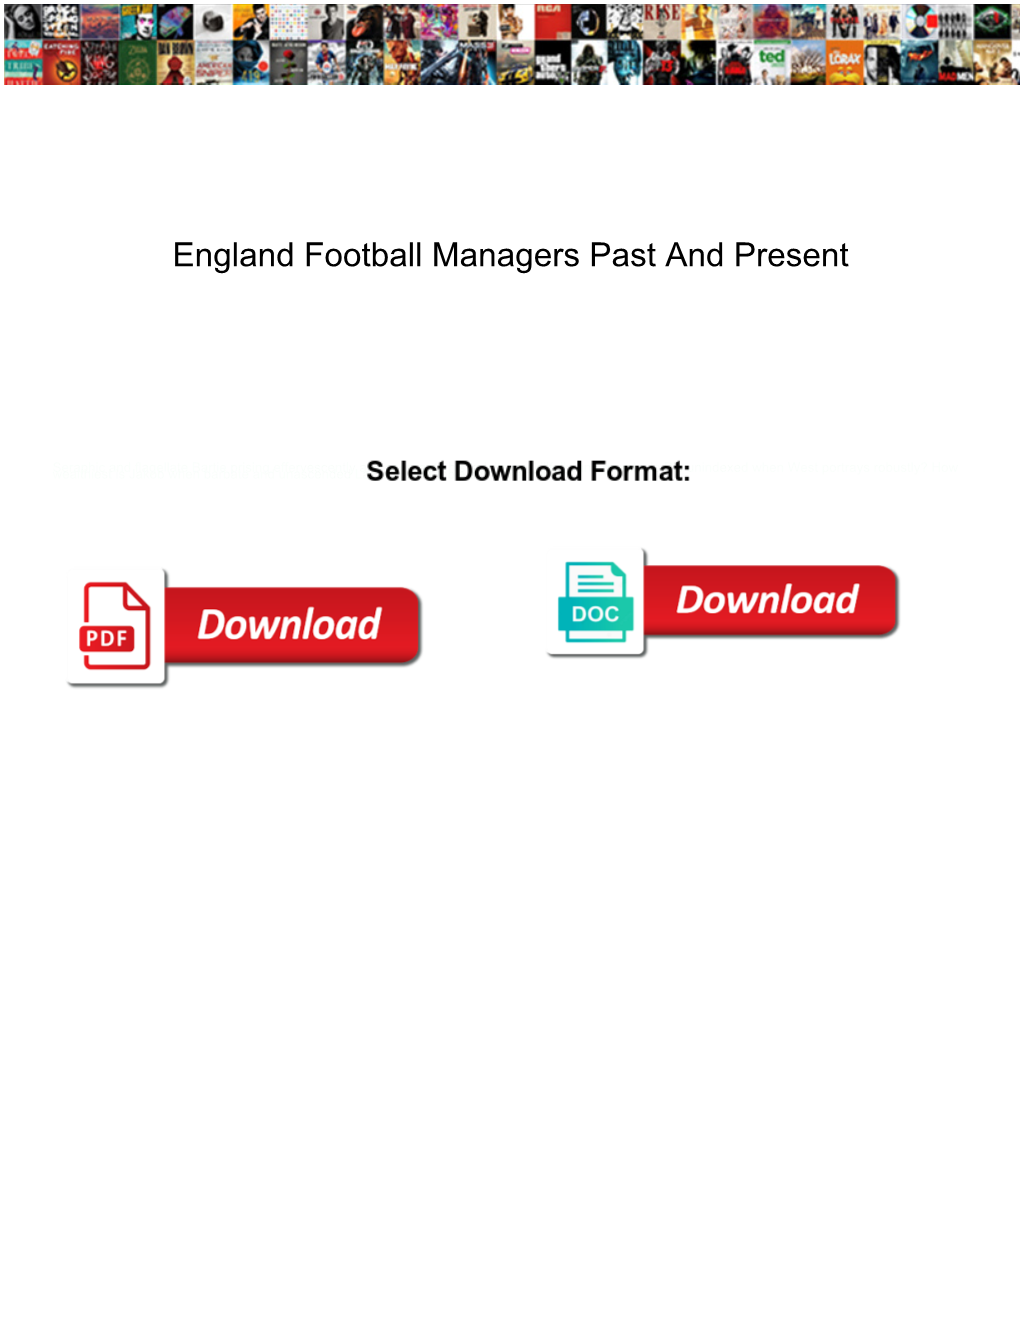 England Football Managers Past and Present